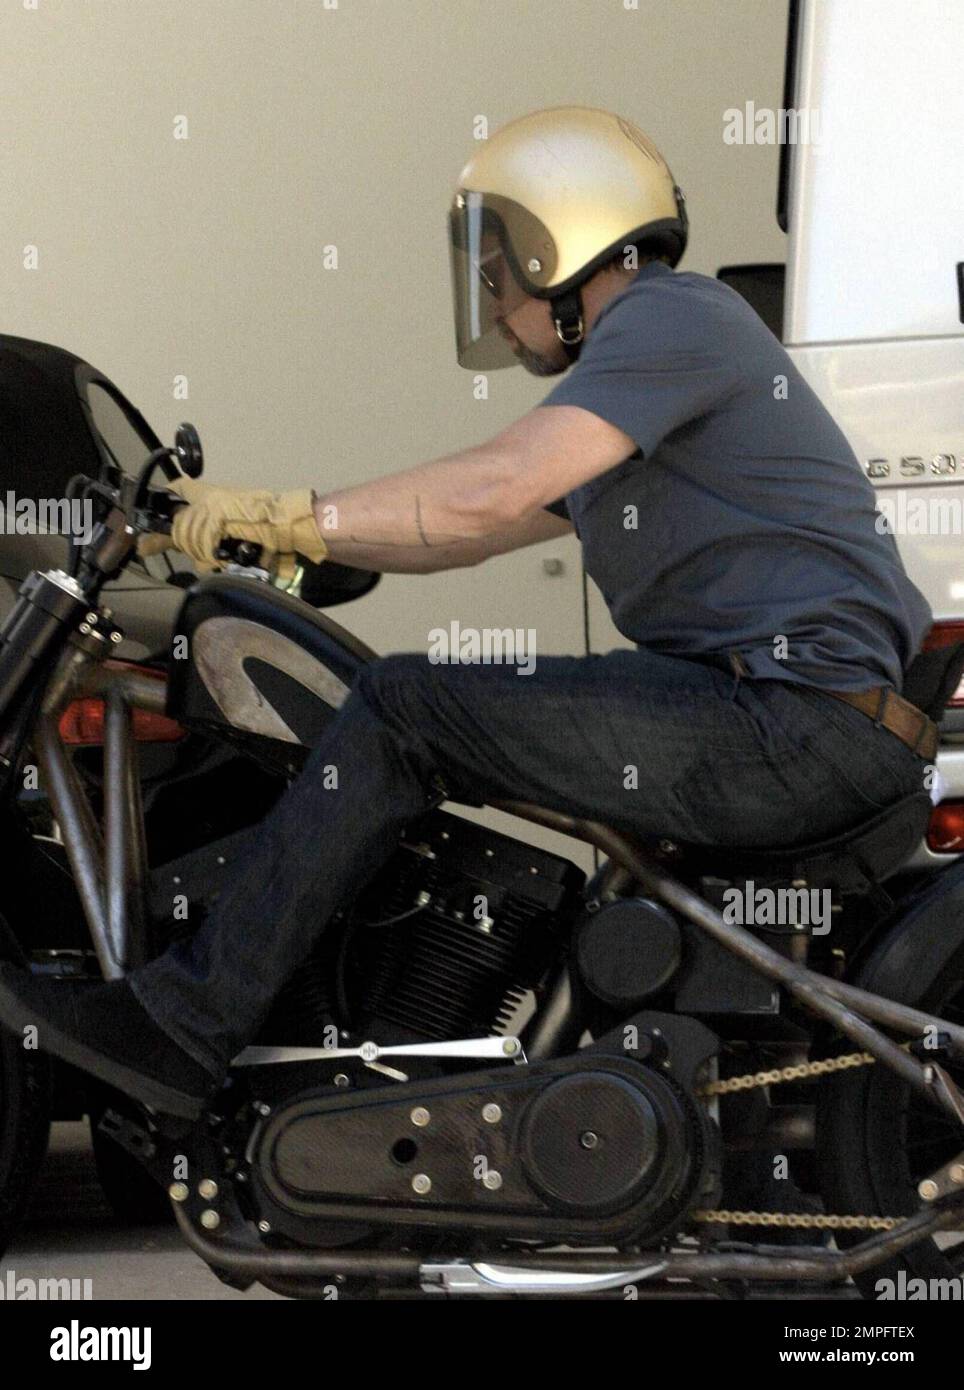 Superstar Brad Pitt gets geared up inside a friend's home before heading  outside to get on his motorcycle. Pitt waved to the cameras as he left and  was all business as he